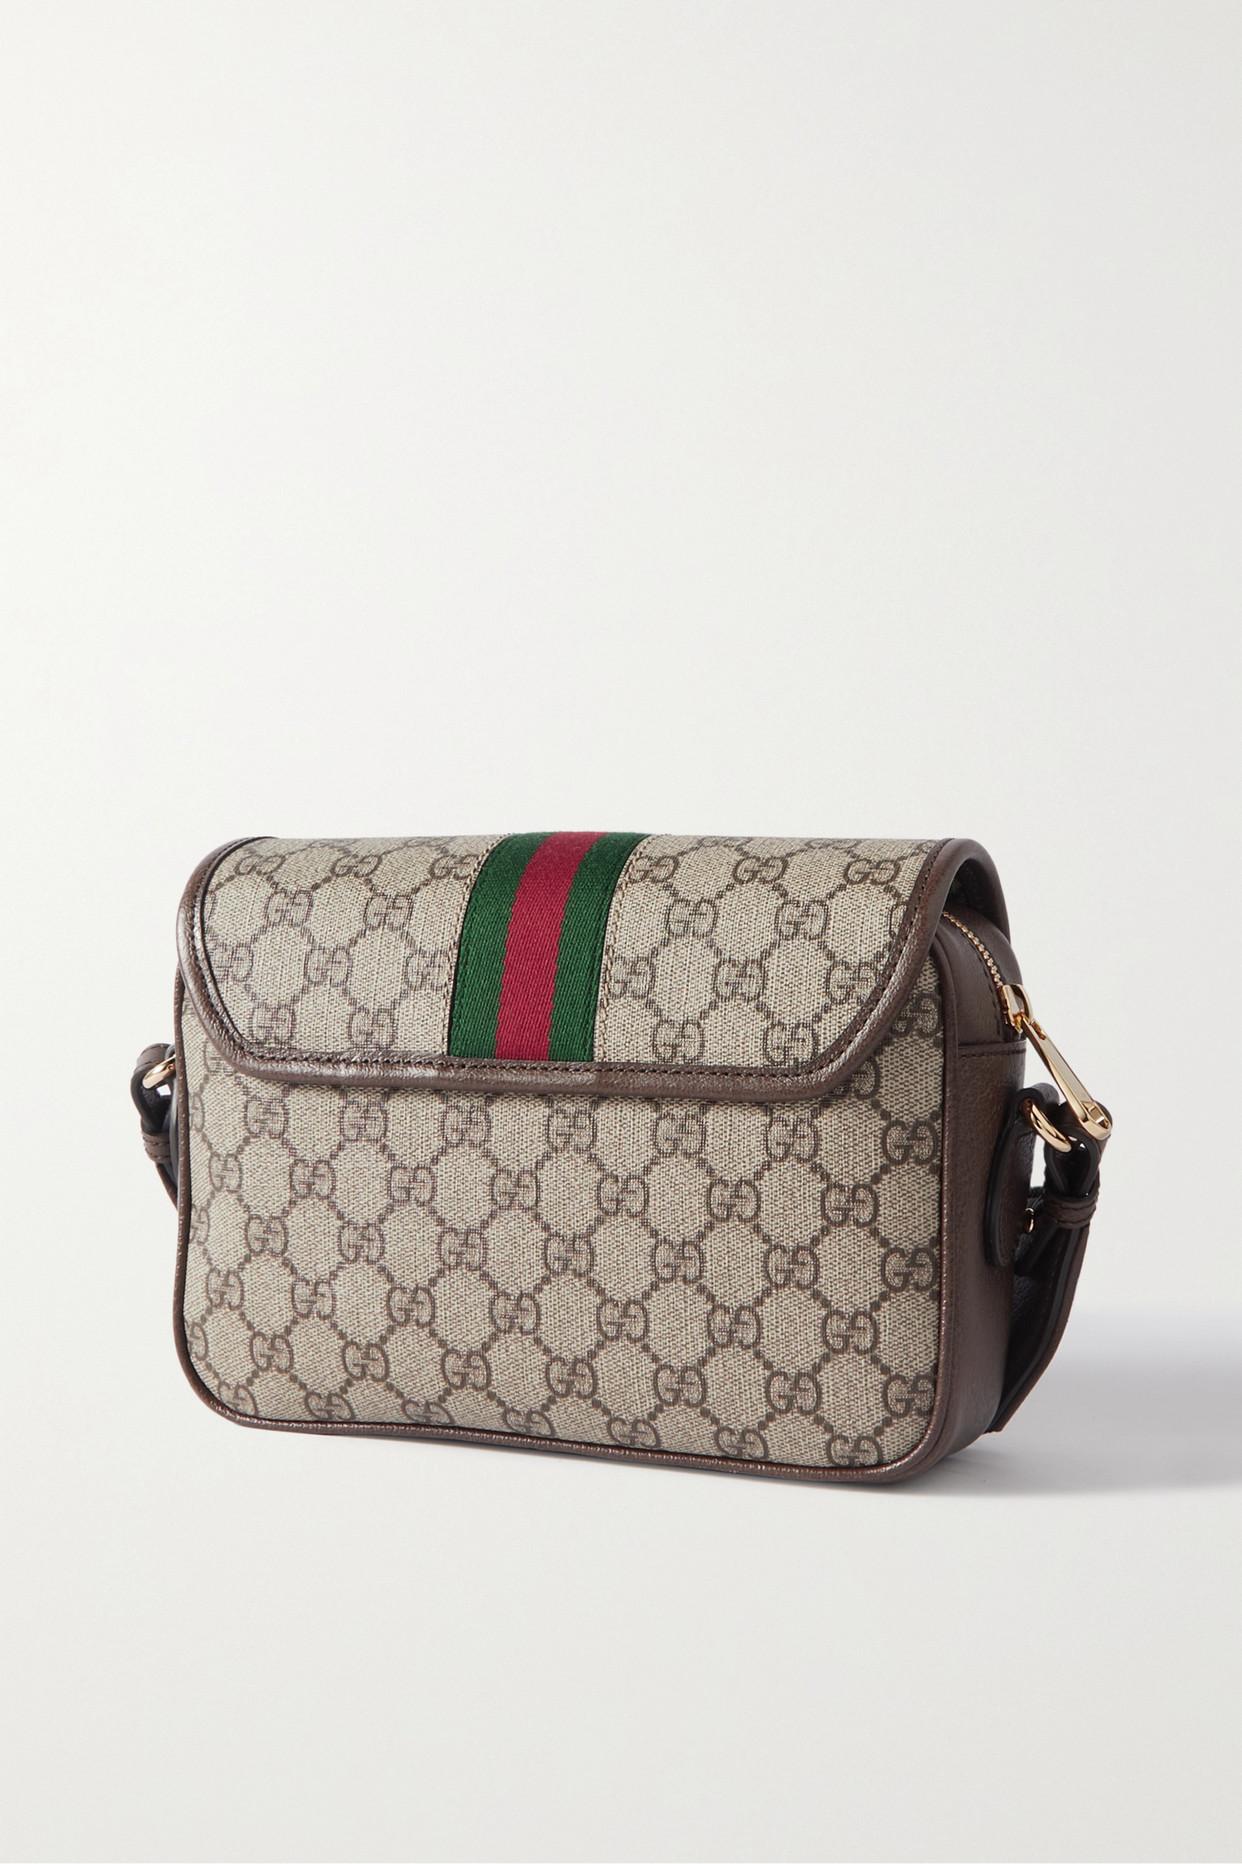 GUCCI GG Supreme mini textured leather-trimmed printed coated-canvas tote